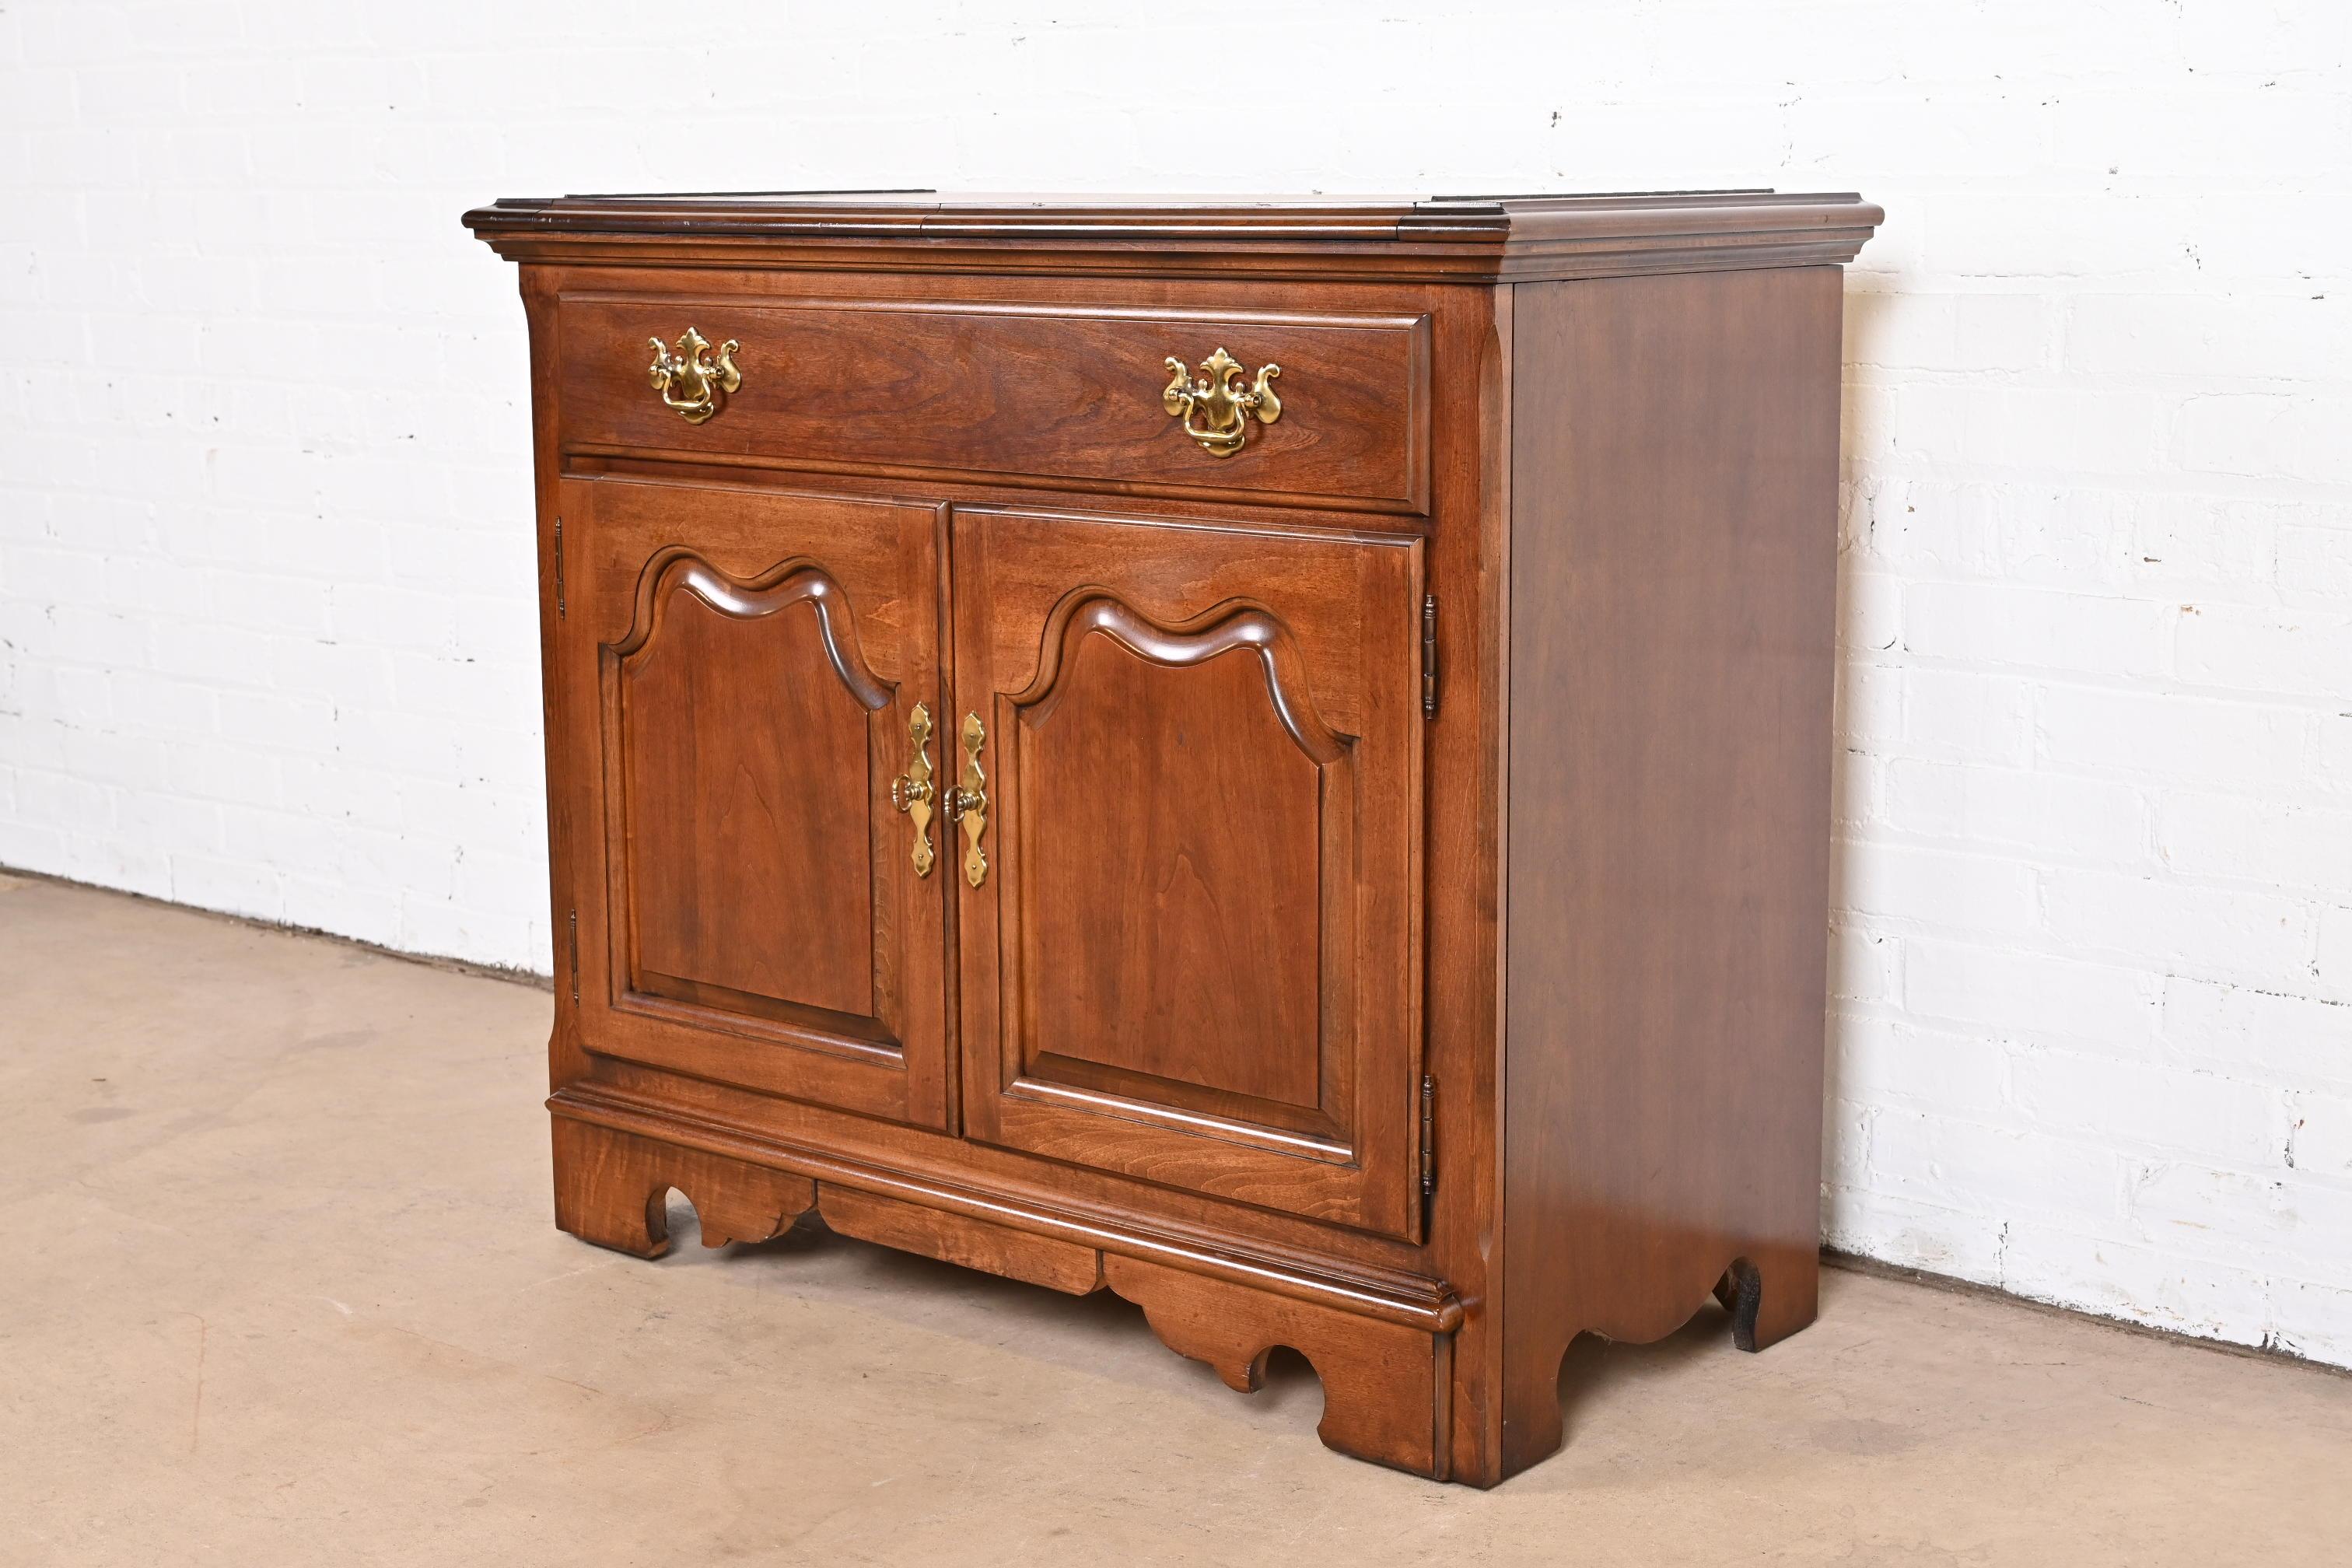 A beautiful Georgian style flip top buffet server or bar cabinet

By Thomasville, 